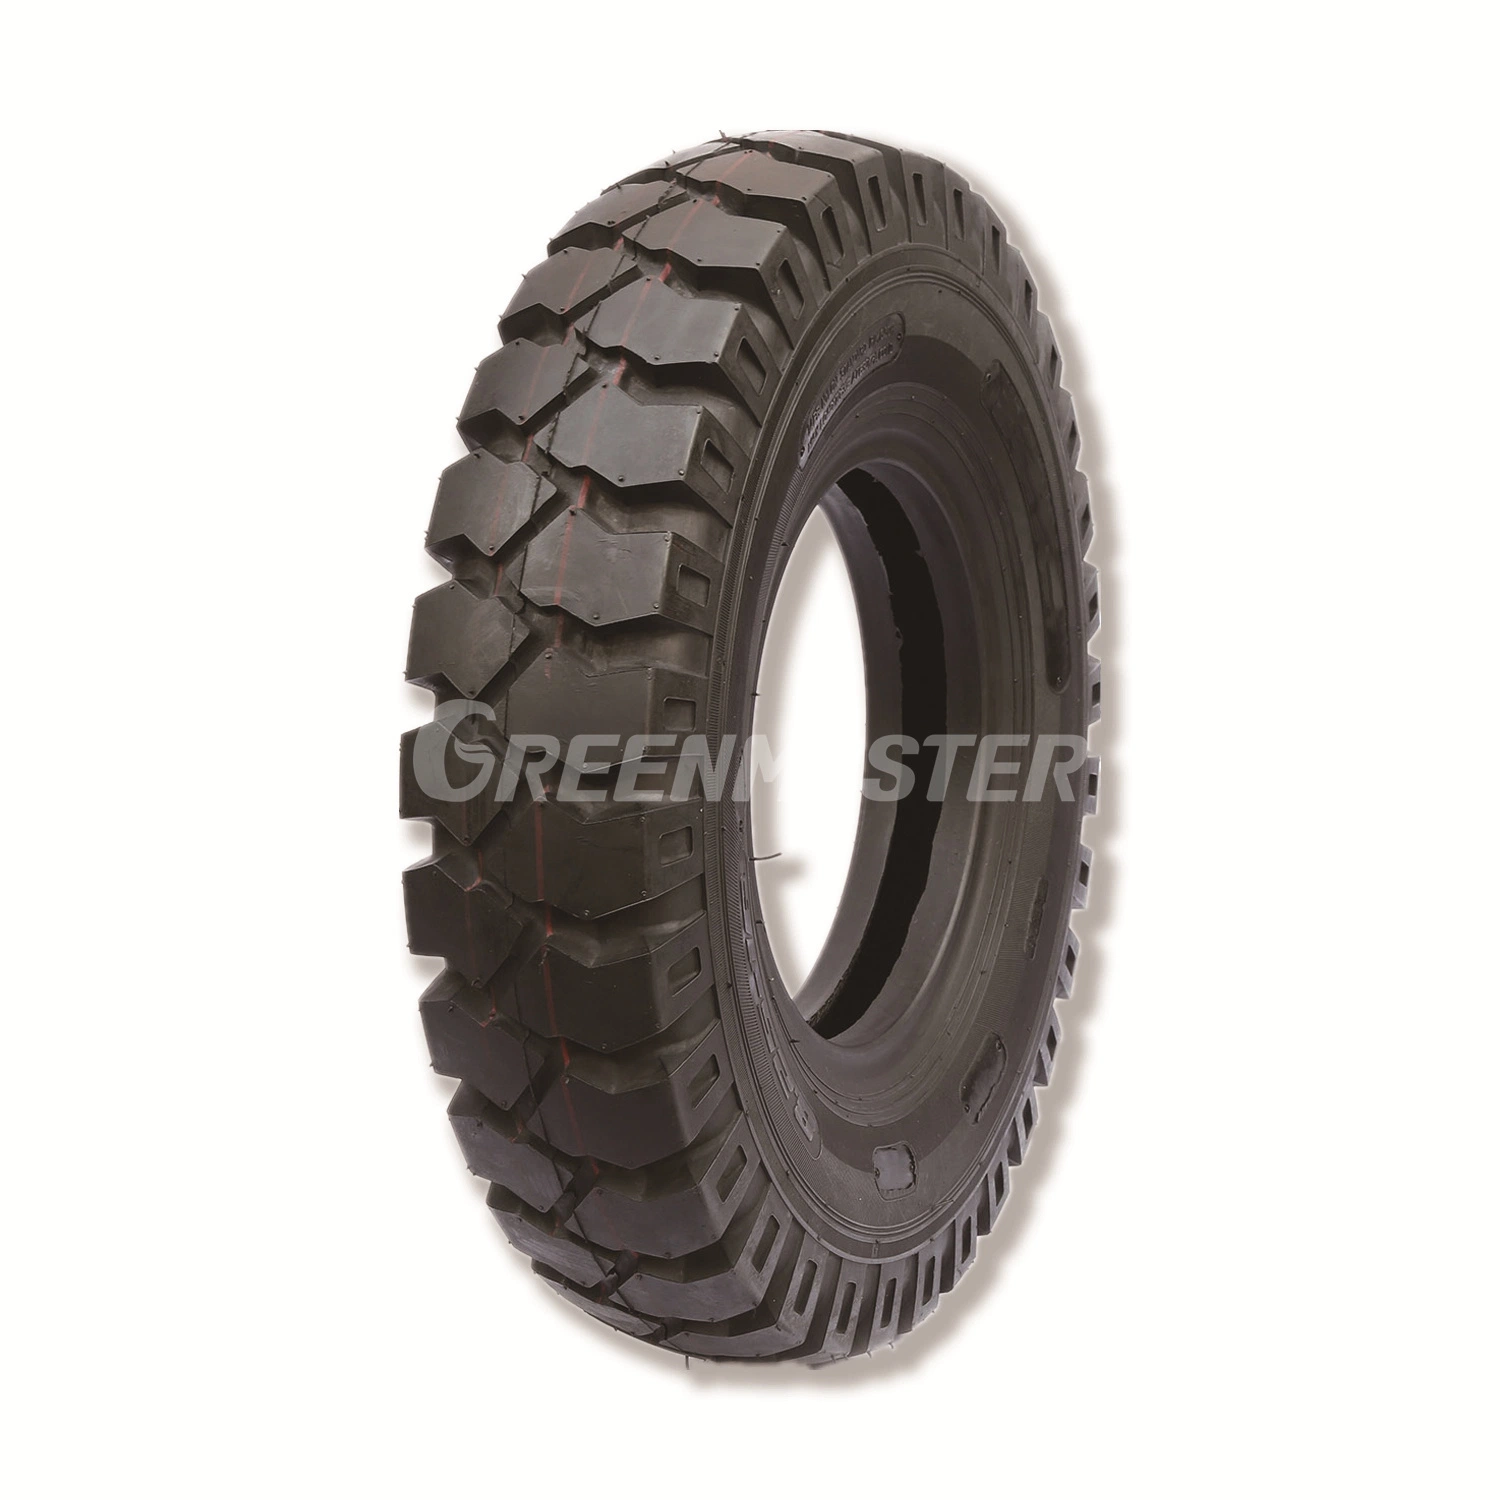 China Factory Wholesale Farm Tractor Tyres and Light Truck Tires, High Durability Mining Heavy Truck Tyre with 10.00-20 11.00*20 12.00-20 14.00X20 Wheel Rim